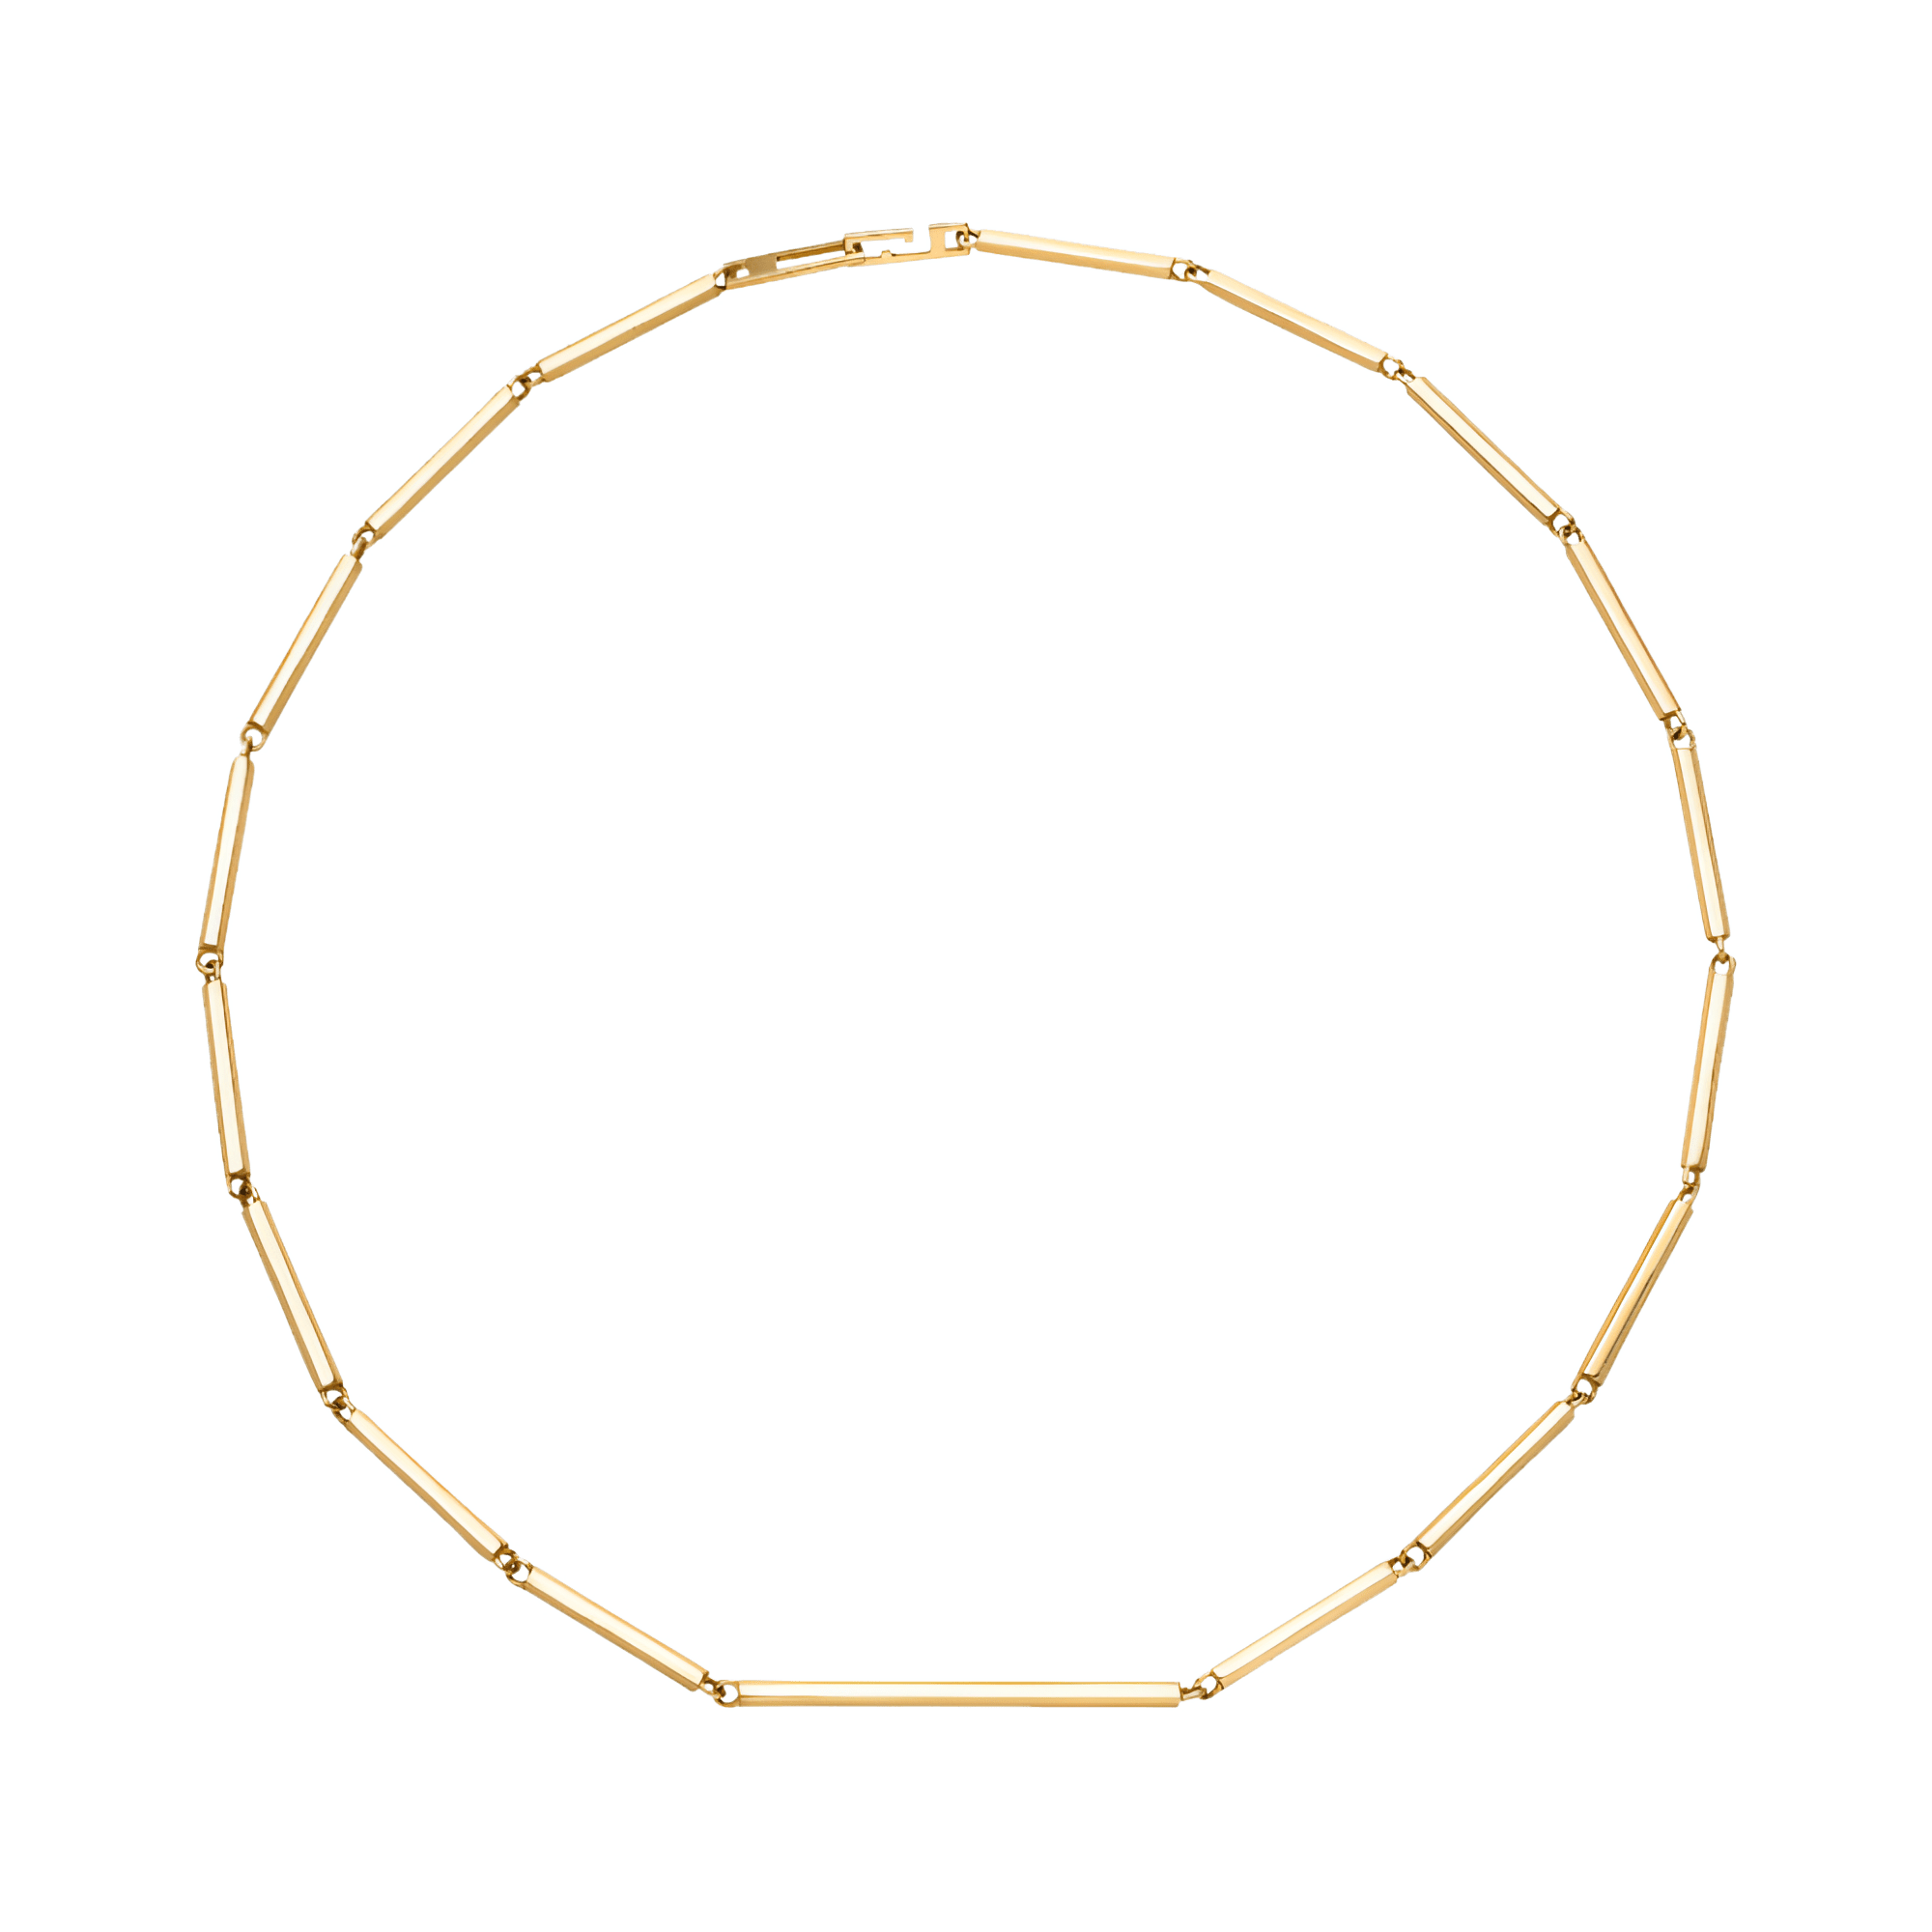 Sunray Gold Bar Chain Necklace | 18K yellow gold / Chain length 420mm / 16.5in  | Jewelry | The Future Rocks